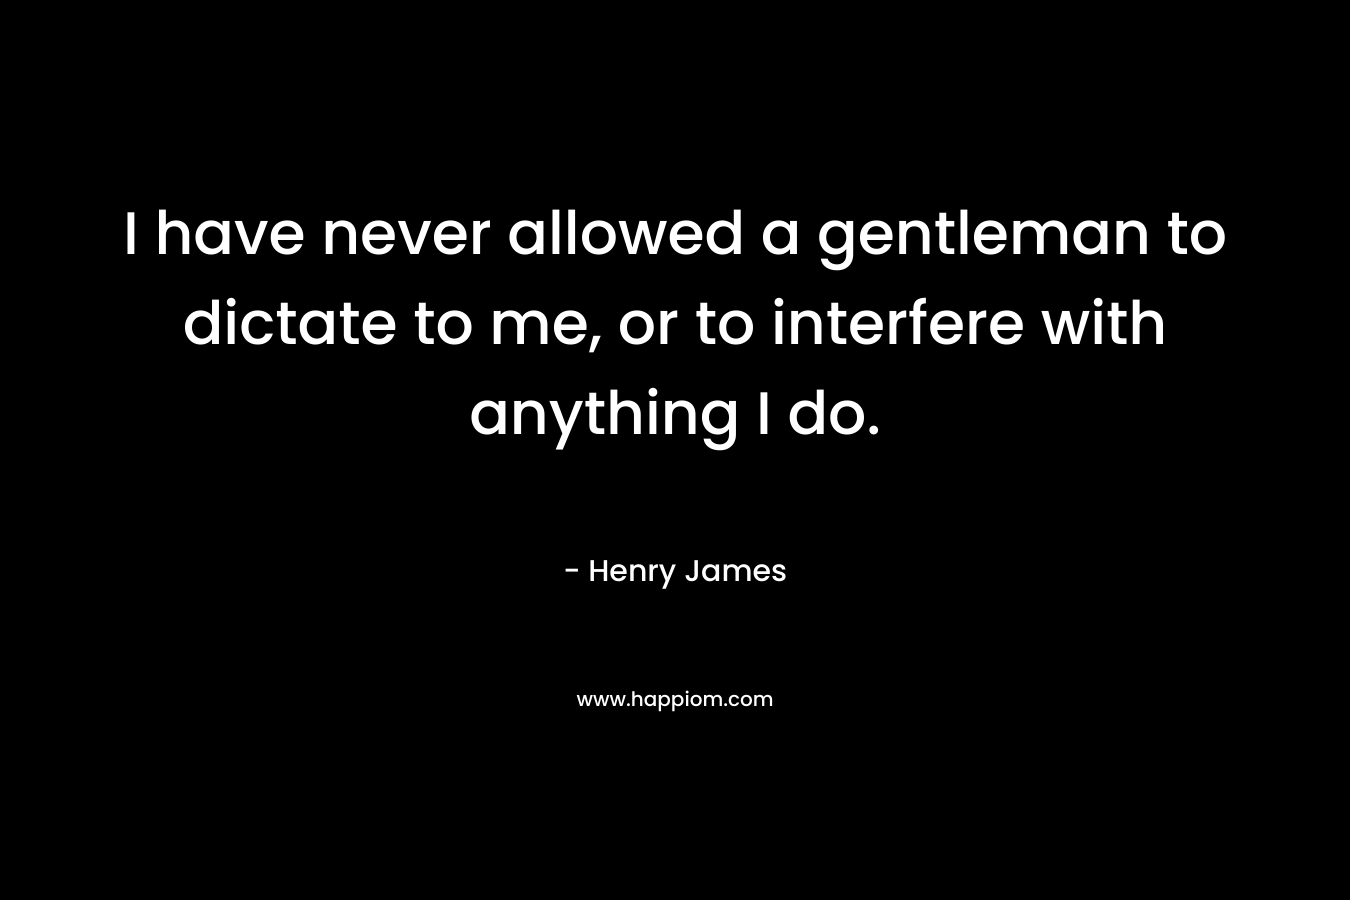 I have never allowed a gentleman to dictate to me, or to interfere with anything I do.